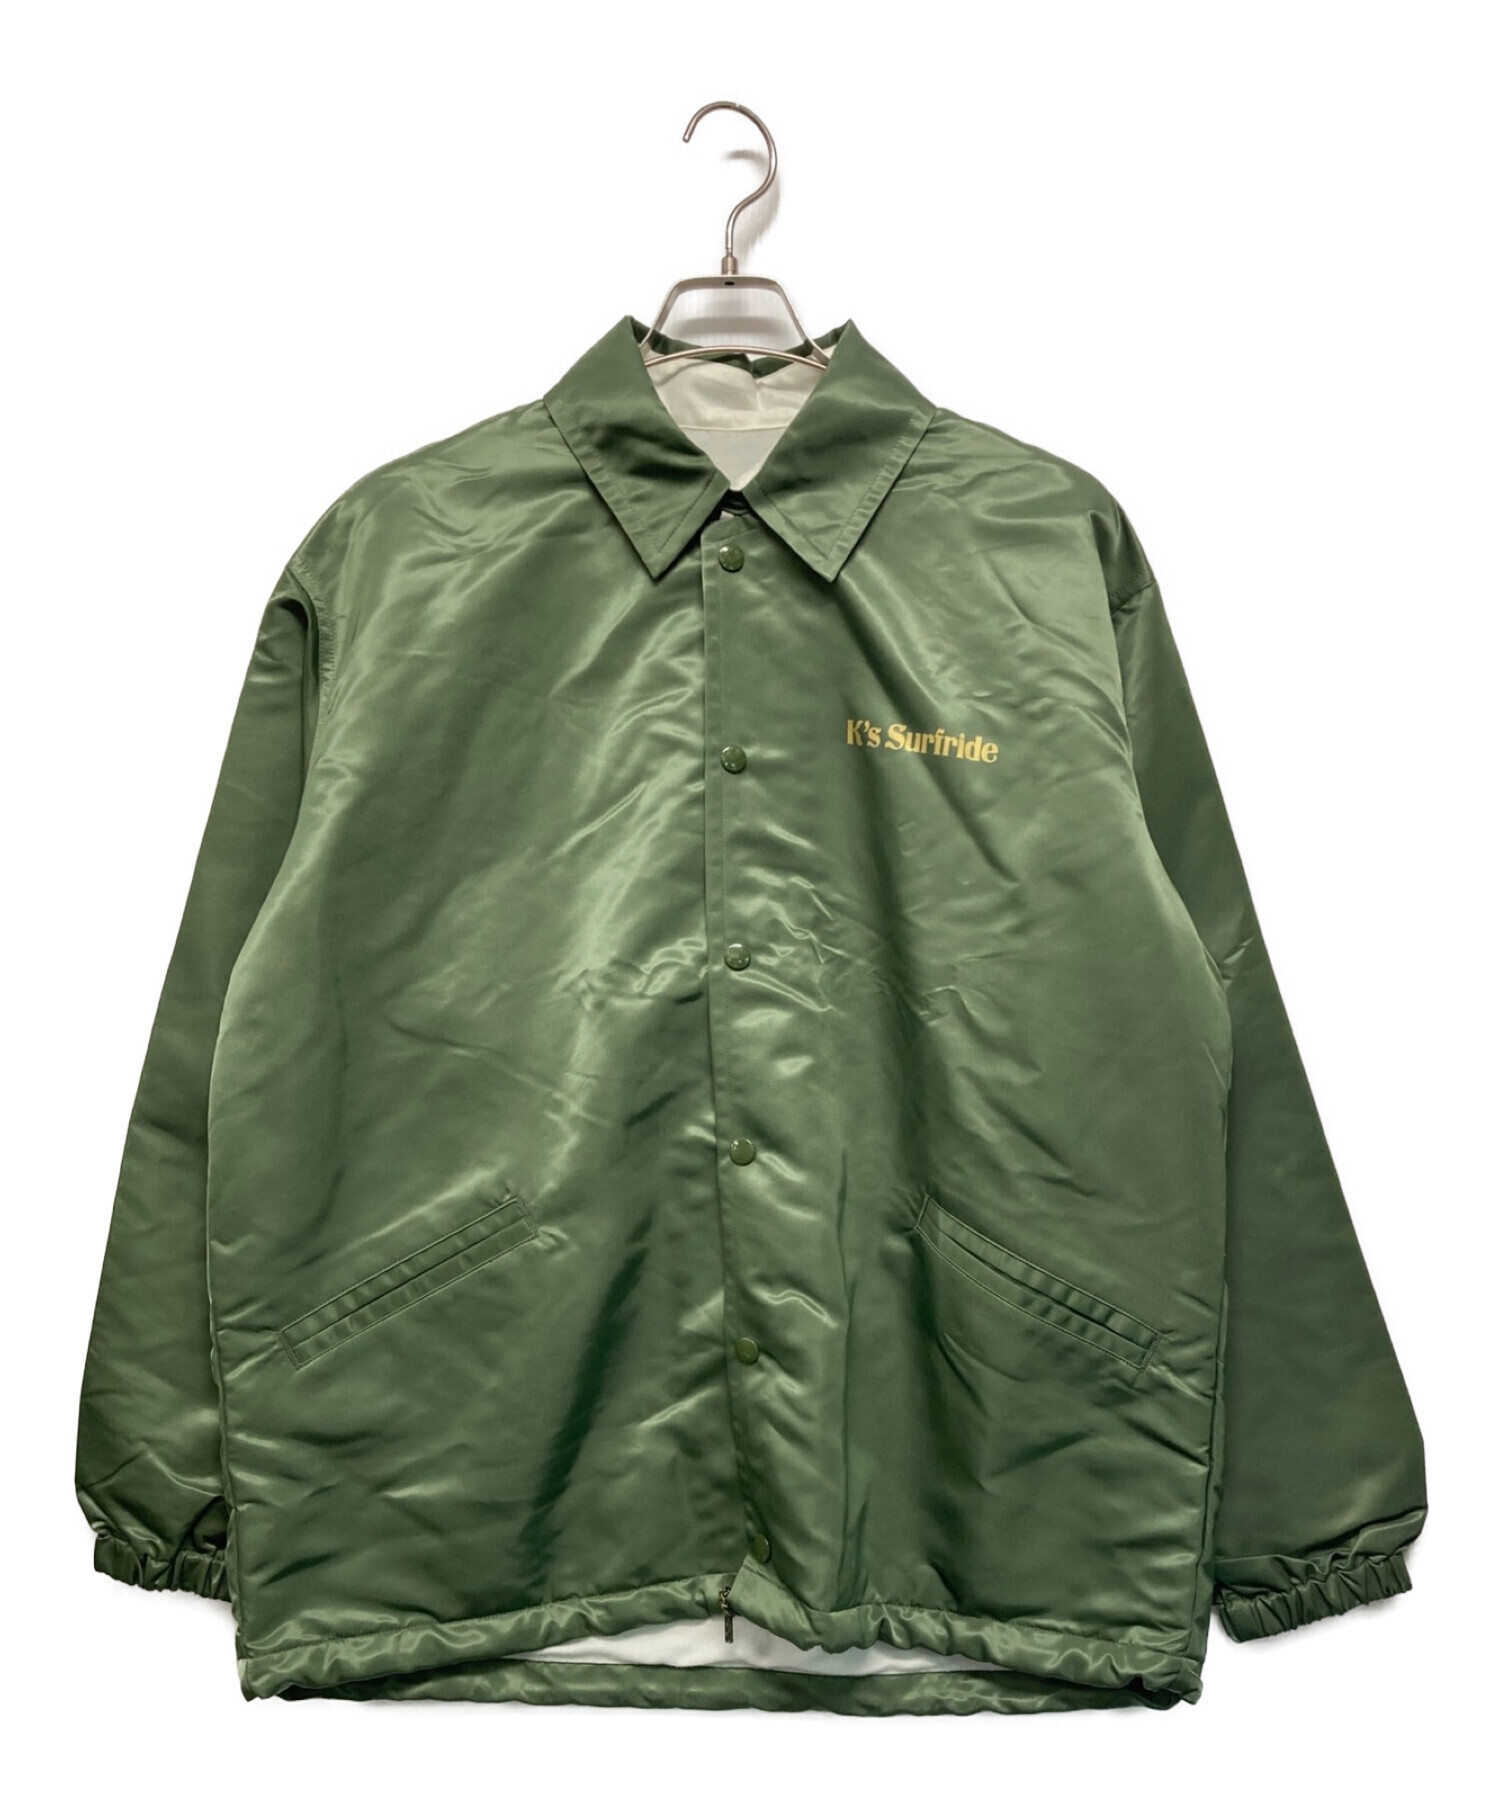 Subculture (サブカルチャー) K's surf ride DAMA SURFBOARDS COACHES JACKET オリーブ サイズ:2